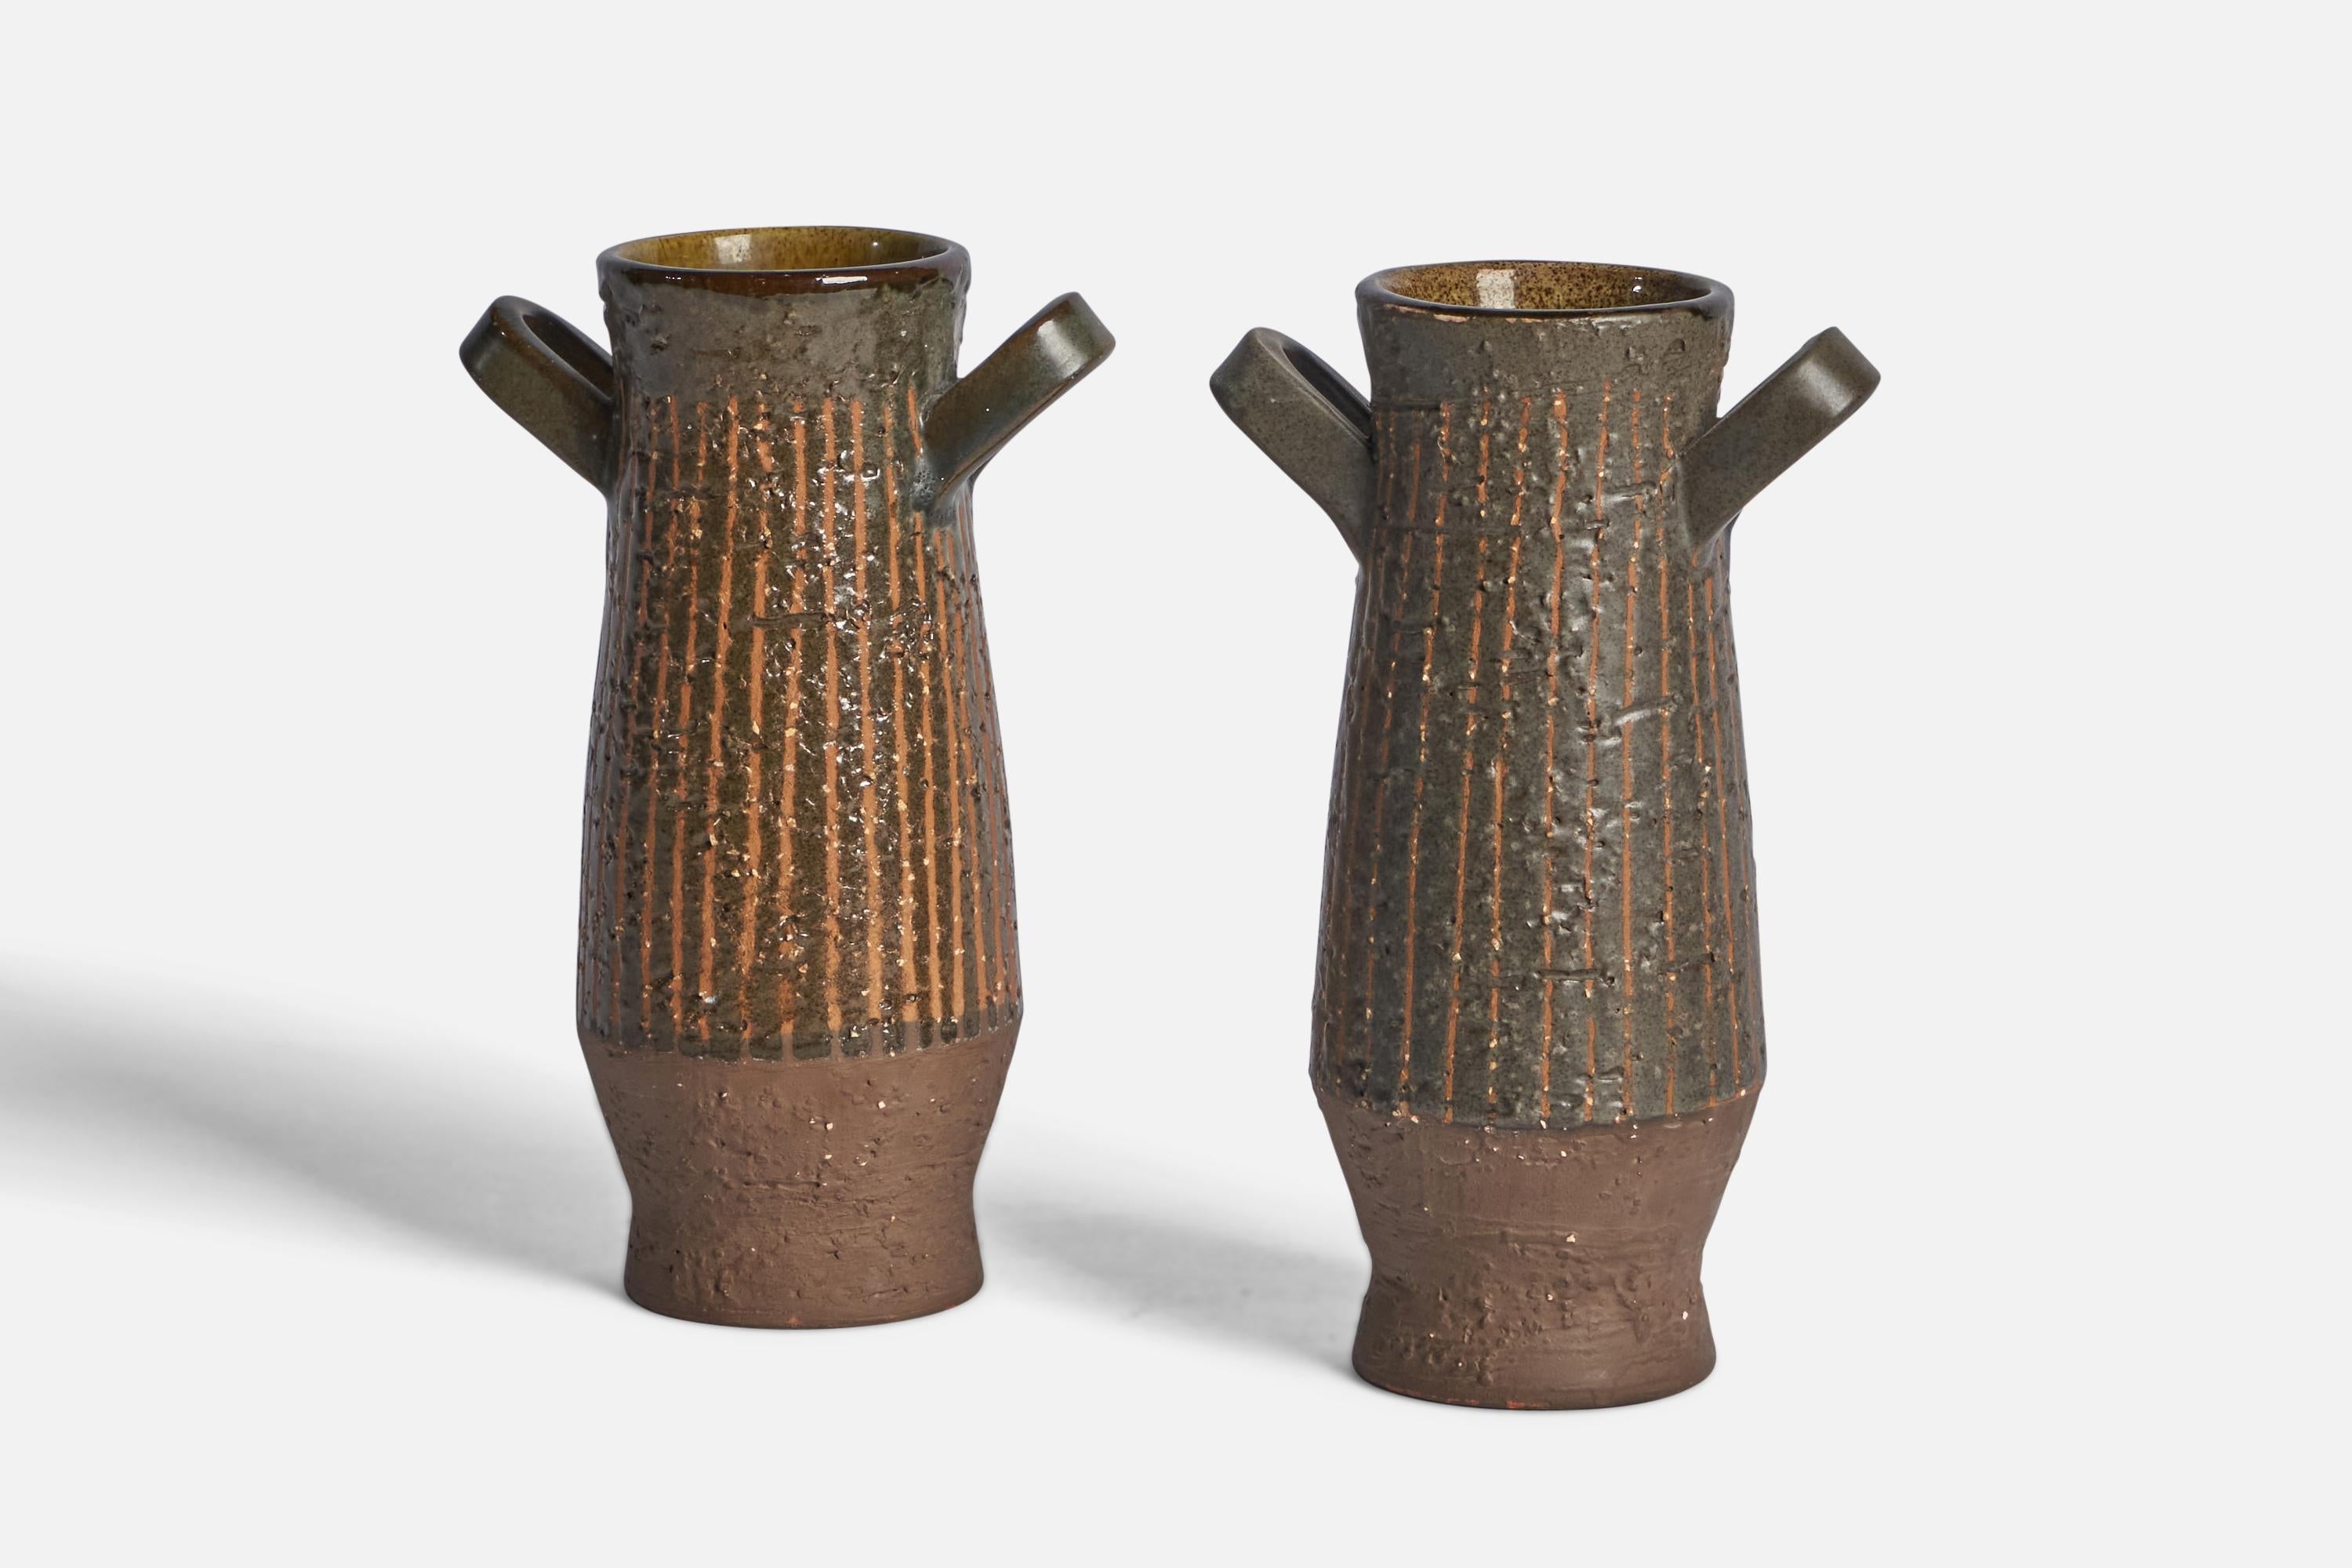 A pair of brown and black-glazed earthenware vases designed by Mari Simmulson and produced by Upsala Ekeby, Sweden, c. 1950s.